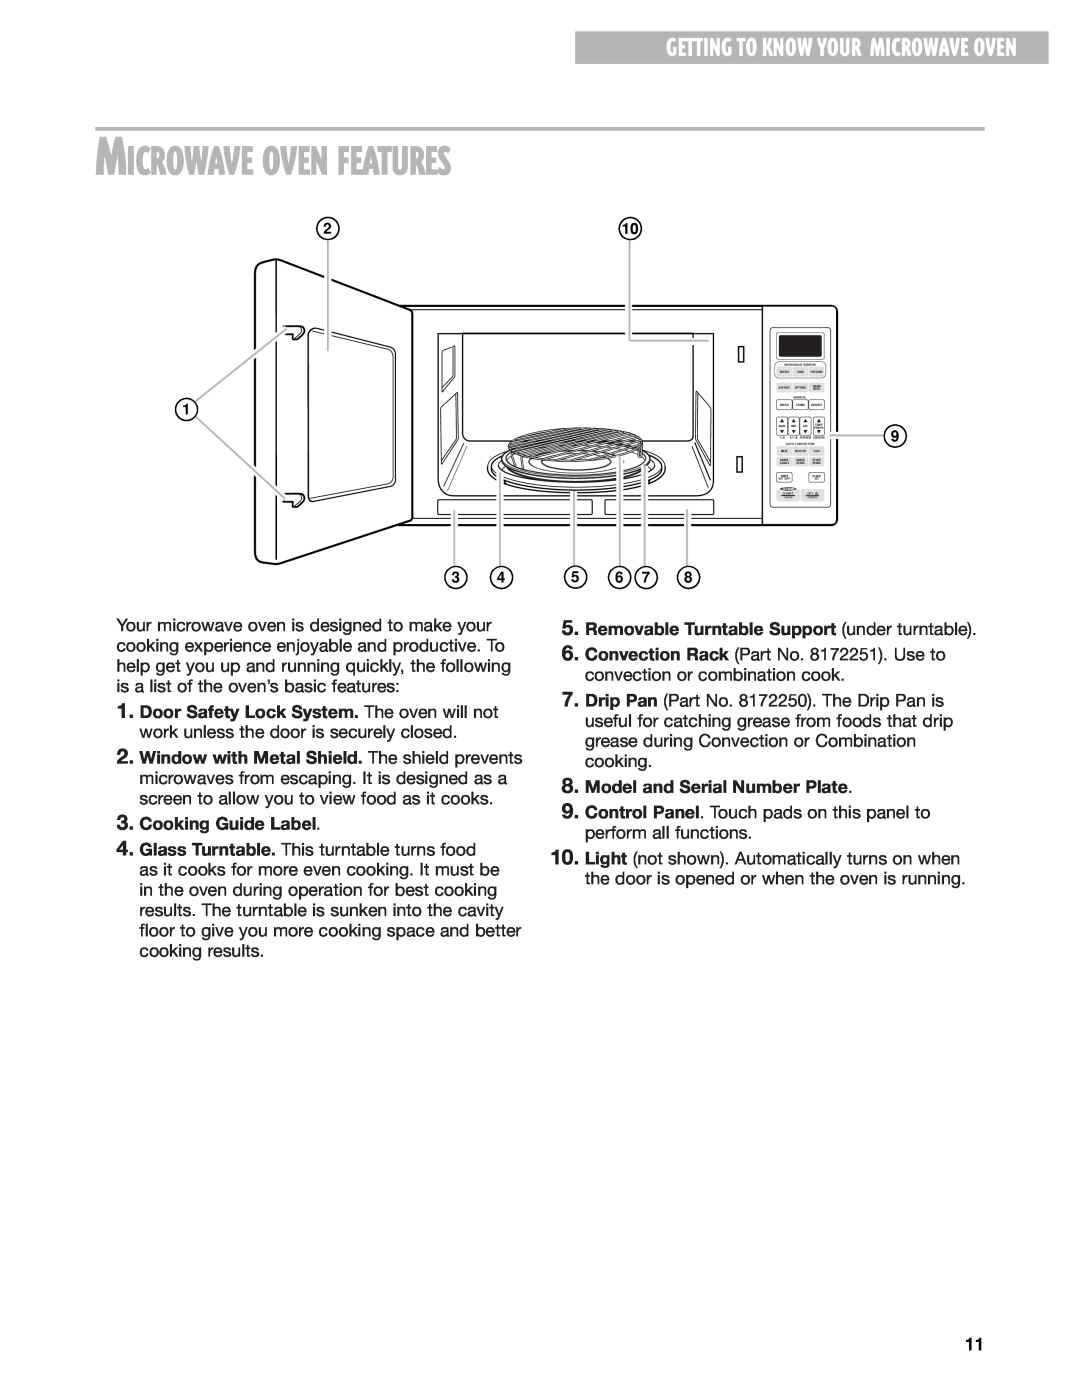 Whirlpool GM8155XJ installation instructions Microwave Oven Features, Getting To Know Your Microwave Oven 